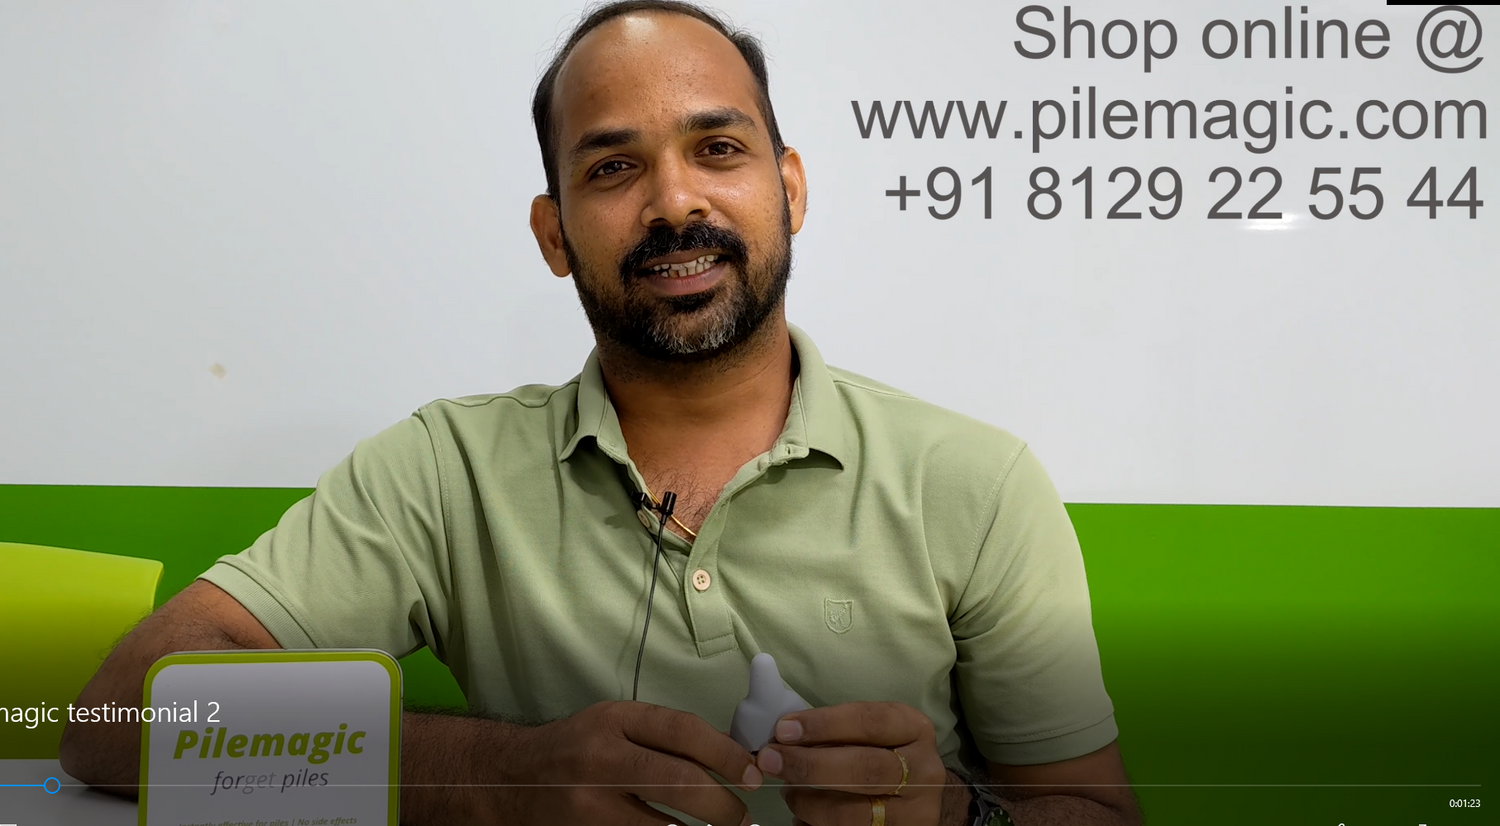 DPlease hear what Mr Lalachan has to say about pilemagic which is the world's first wearable product for relieving the symptoms of piles invented by Dr Kishore kiran. He has used pilemagic for the past 6 months. He used to wear it every morning after defecation and cleaning. Previously he used to have pain due to piles for atleast 5-6 hrs after passing motion in the morning. He used to have pain during the travel to his office and even during his office hours. This had made his life so difficult that he could not concentrate on his work. It was Dr Kishore kiran who suggested pilemagic to him. He found that it was instantly effective.The pain relieved when this product was introduced into the anal canal. He used to keep the pilemagic whenever he had symptoms for an immediate relief. He wore the pilemagic regularly to his office and he never got any pain due to piles anymore. Plus, nobody in his office knew that he was using pilemagic.  Pilemagic became a part of his life. He reuses it whenever it is needed. When he comes back home he stores the pilemagic carefully like something precious for the past 6 months. Lalachan is happy today.He can  now focus better on better things in life like family and his work. Thank you Pilemagic.  Order pilemagic online @ www.pilemagic.comescribe the video